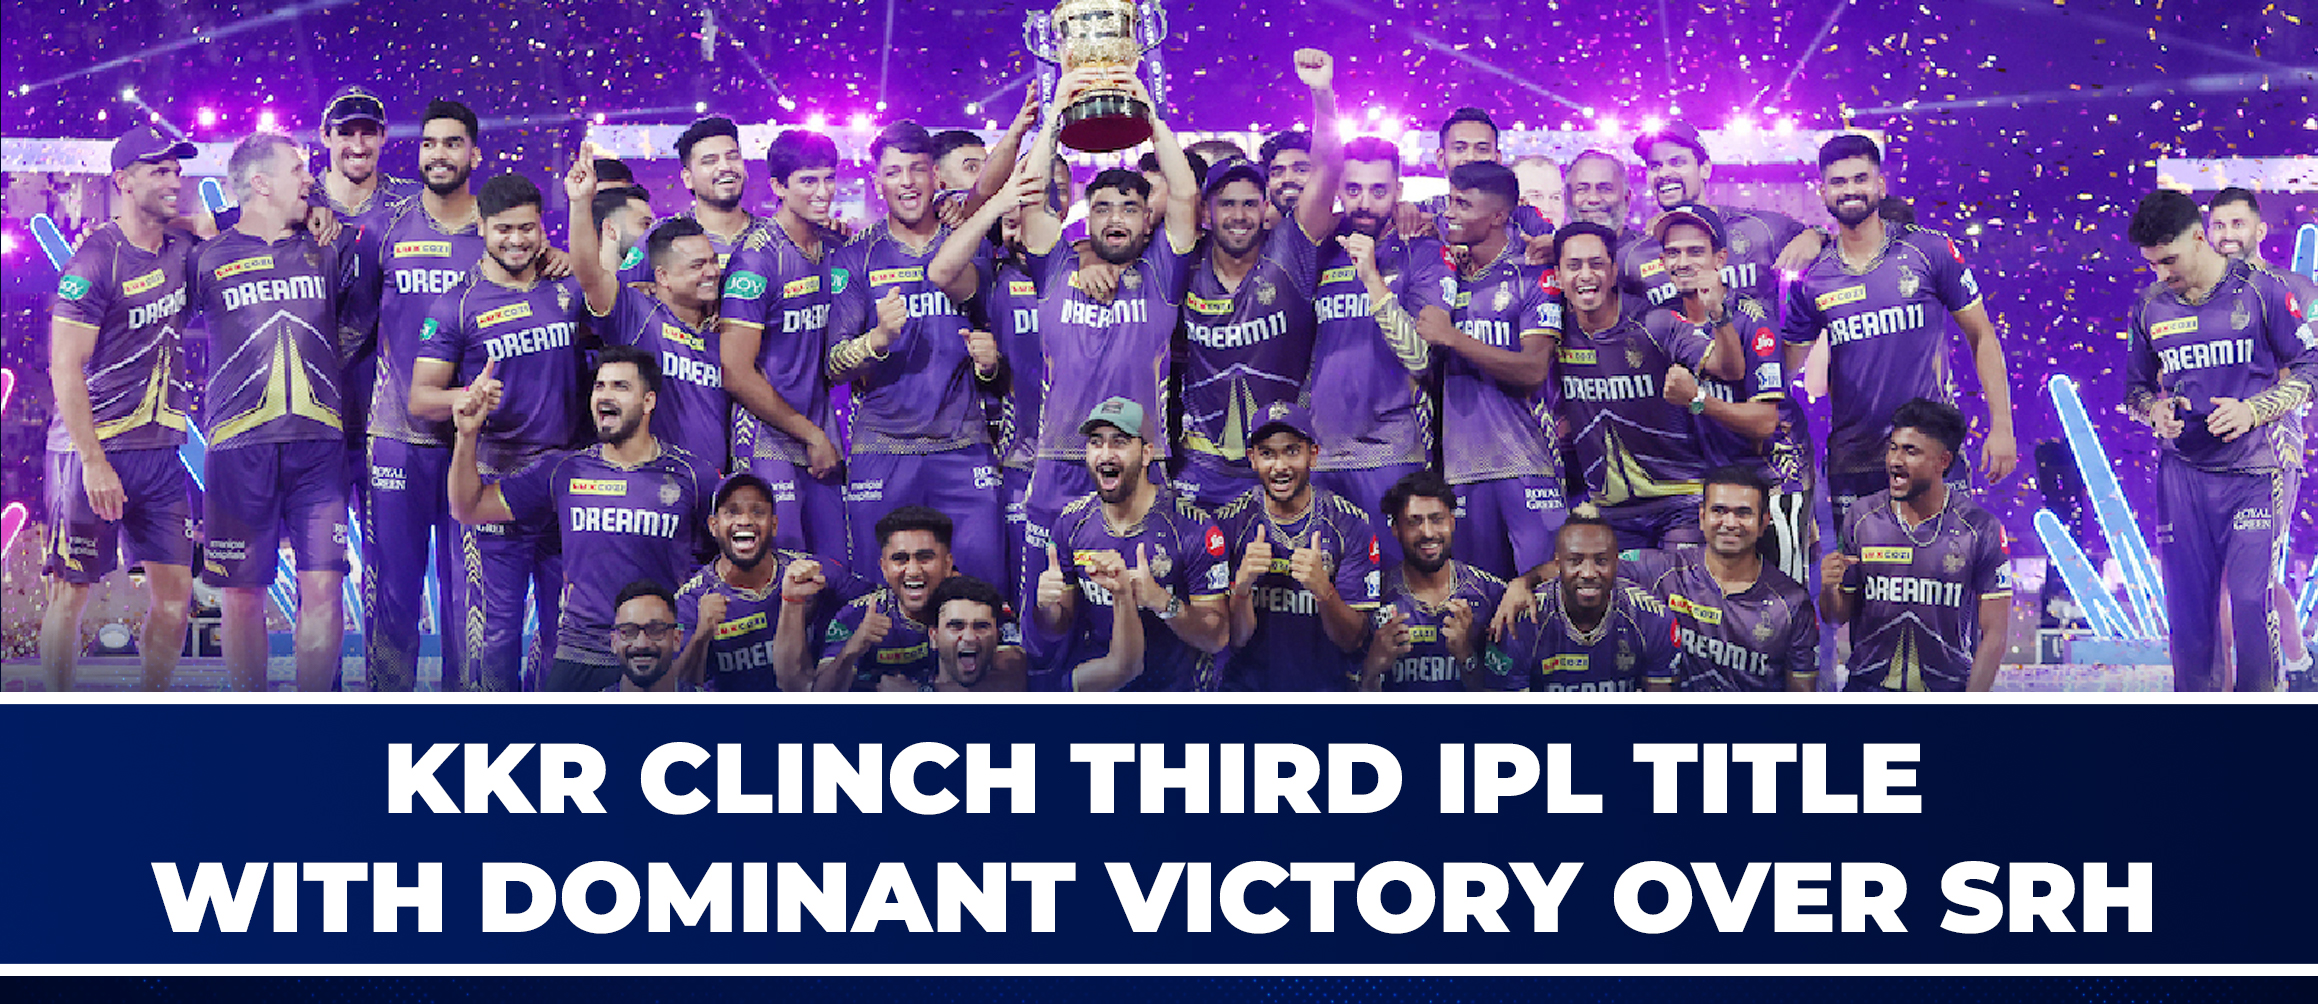 KKR Clinch Third IPL Title with Dominant Victory Over SRH